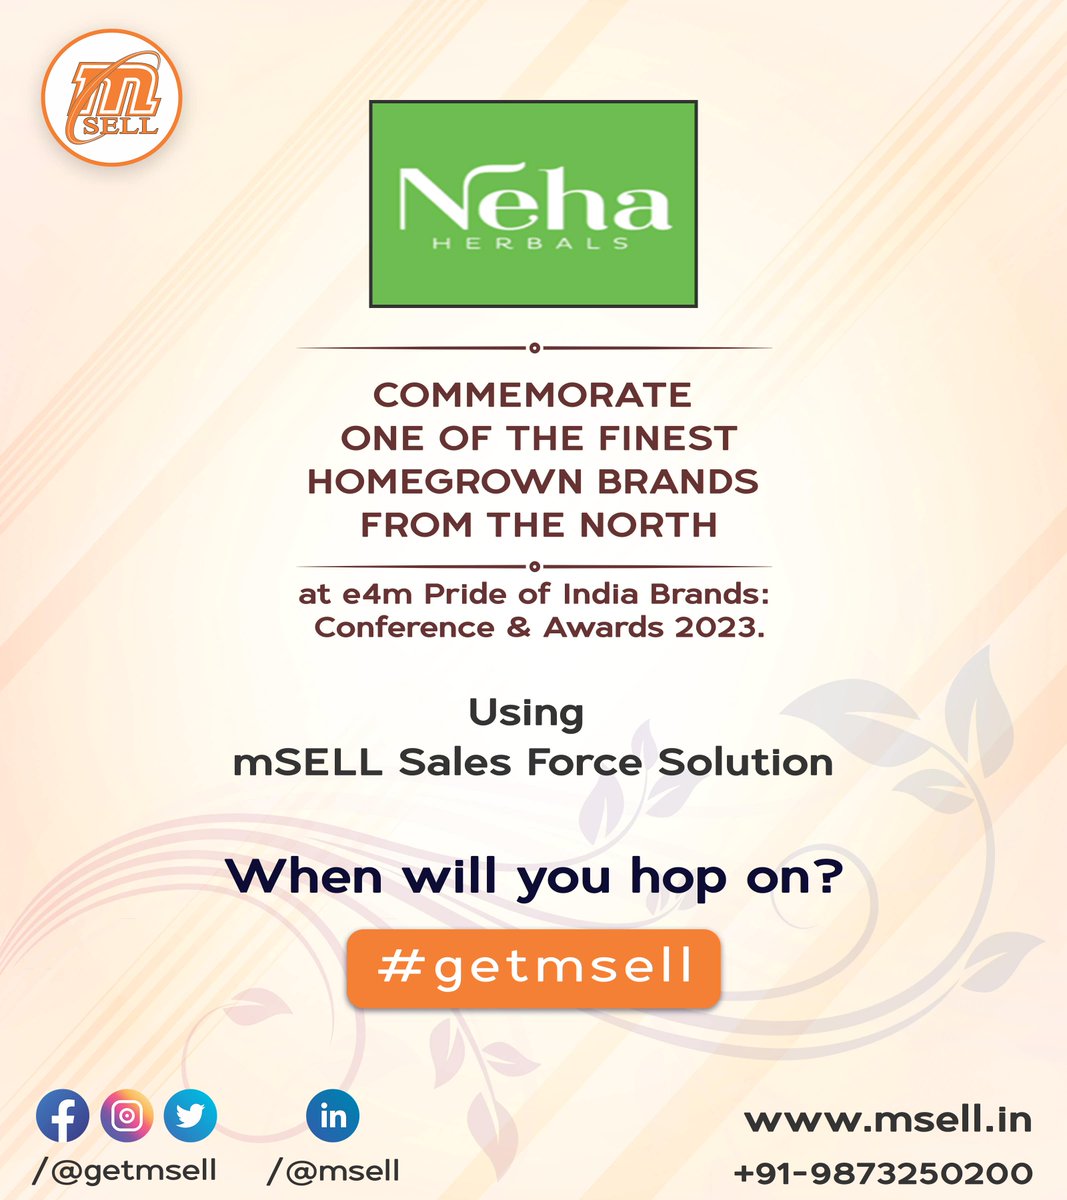 Congratulations neha herbal!

Please feel free to contact us directly @ +91-9873250200.

#fmcgindustry #fmcg #cpg #cpgindustry #saas #msmesector #india #foodandbeverage #beverageindustry #ayurvedic #getmsell #salesautomation #growthmantra #retailtech #retailindustry